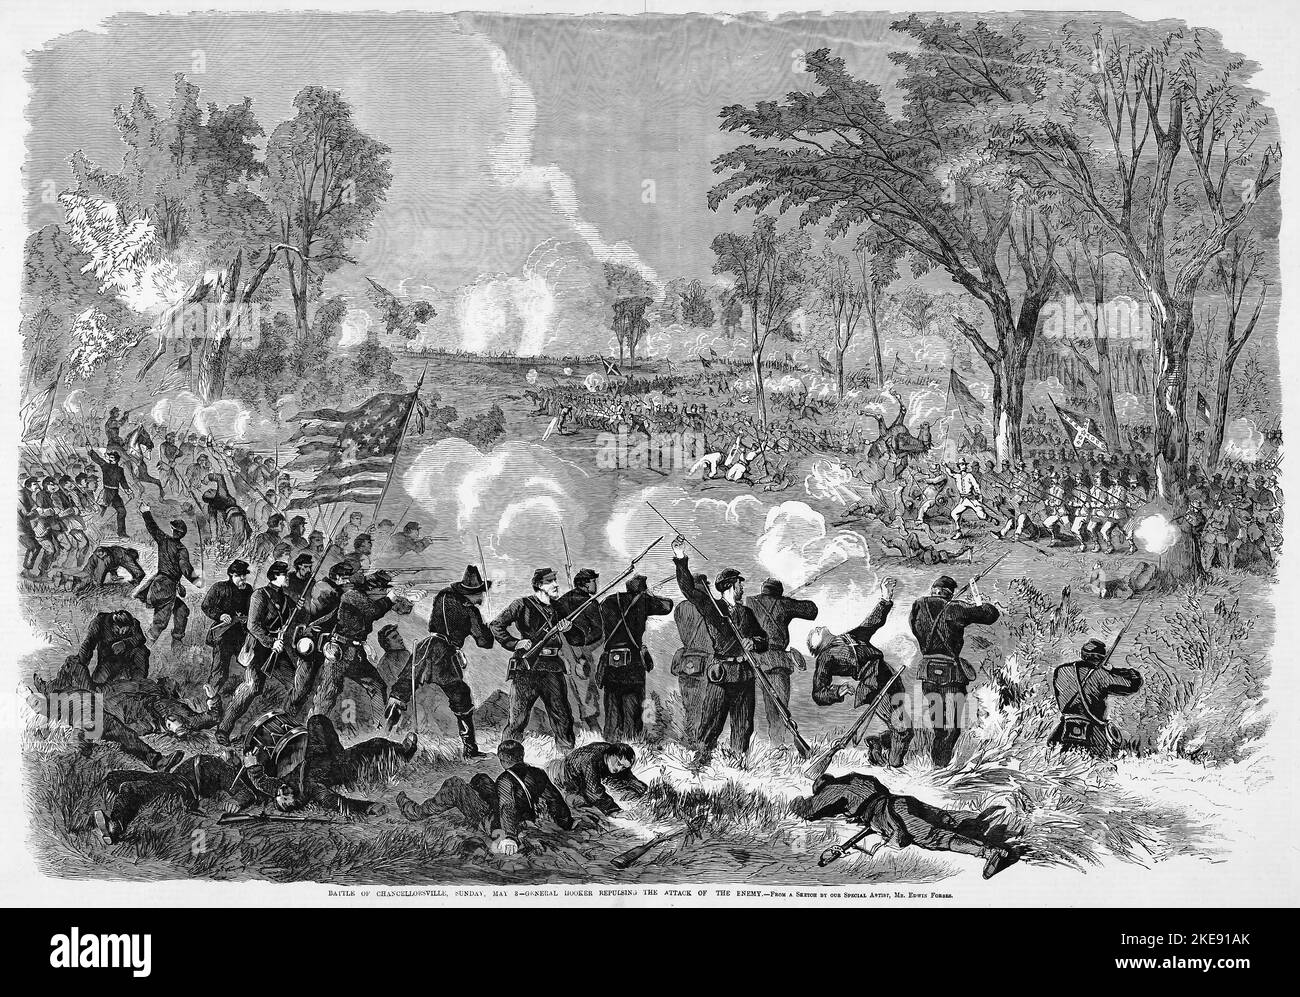 Battle of Chancellorsville, Sunday, May 8th, 1863 - General Joseph Hooker repulsing the attack of the enemy. 19th century American Civil War illustration from Frank Leslie's Illustrated Newspaper Stock Photo